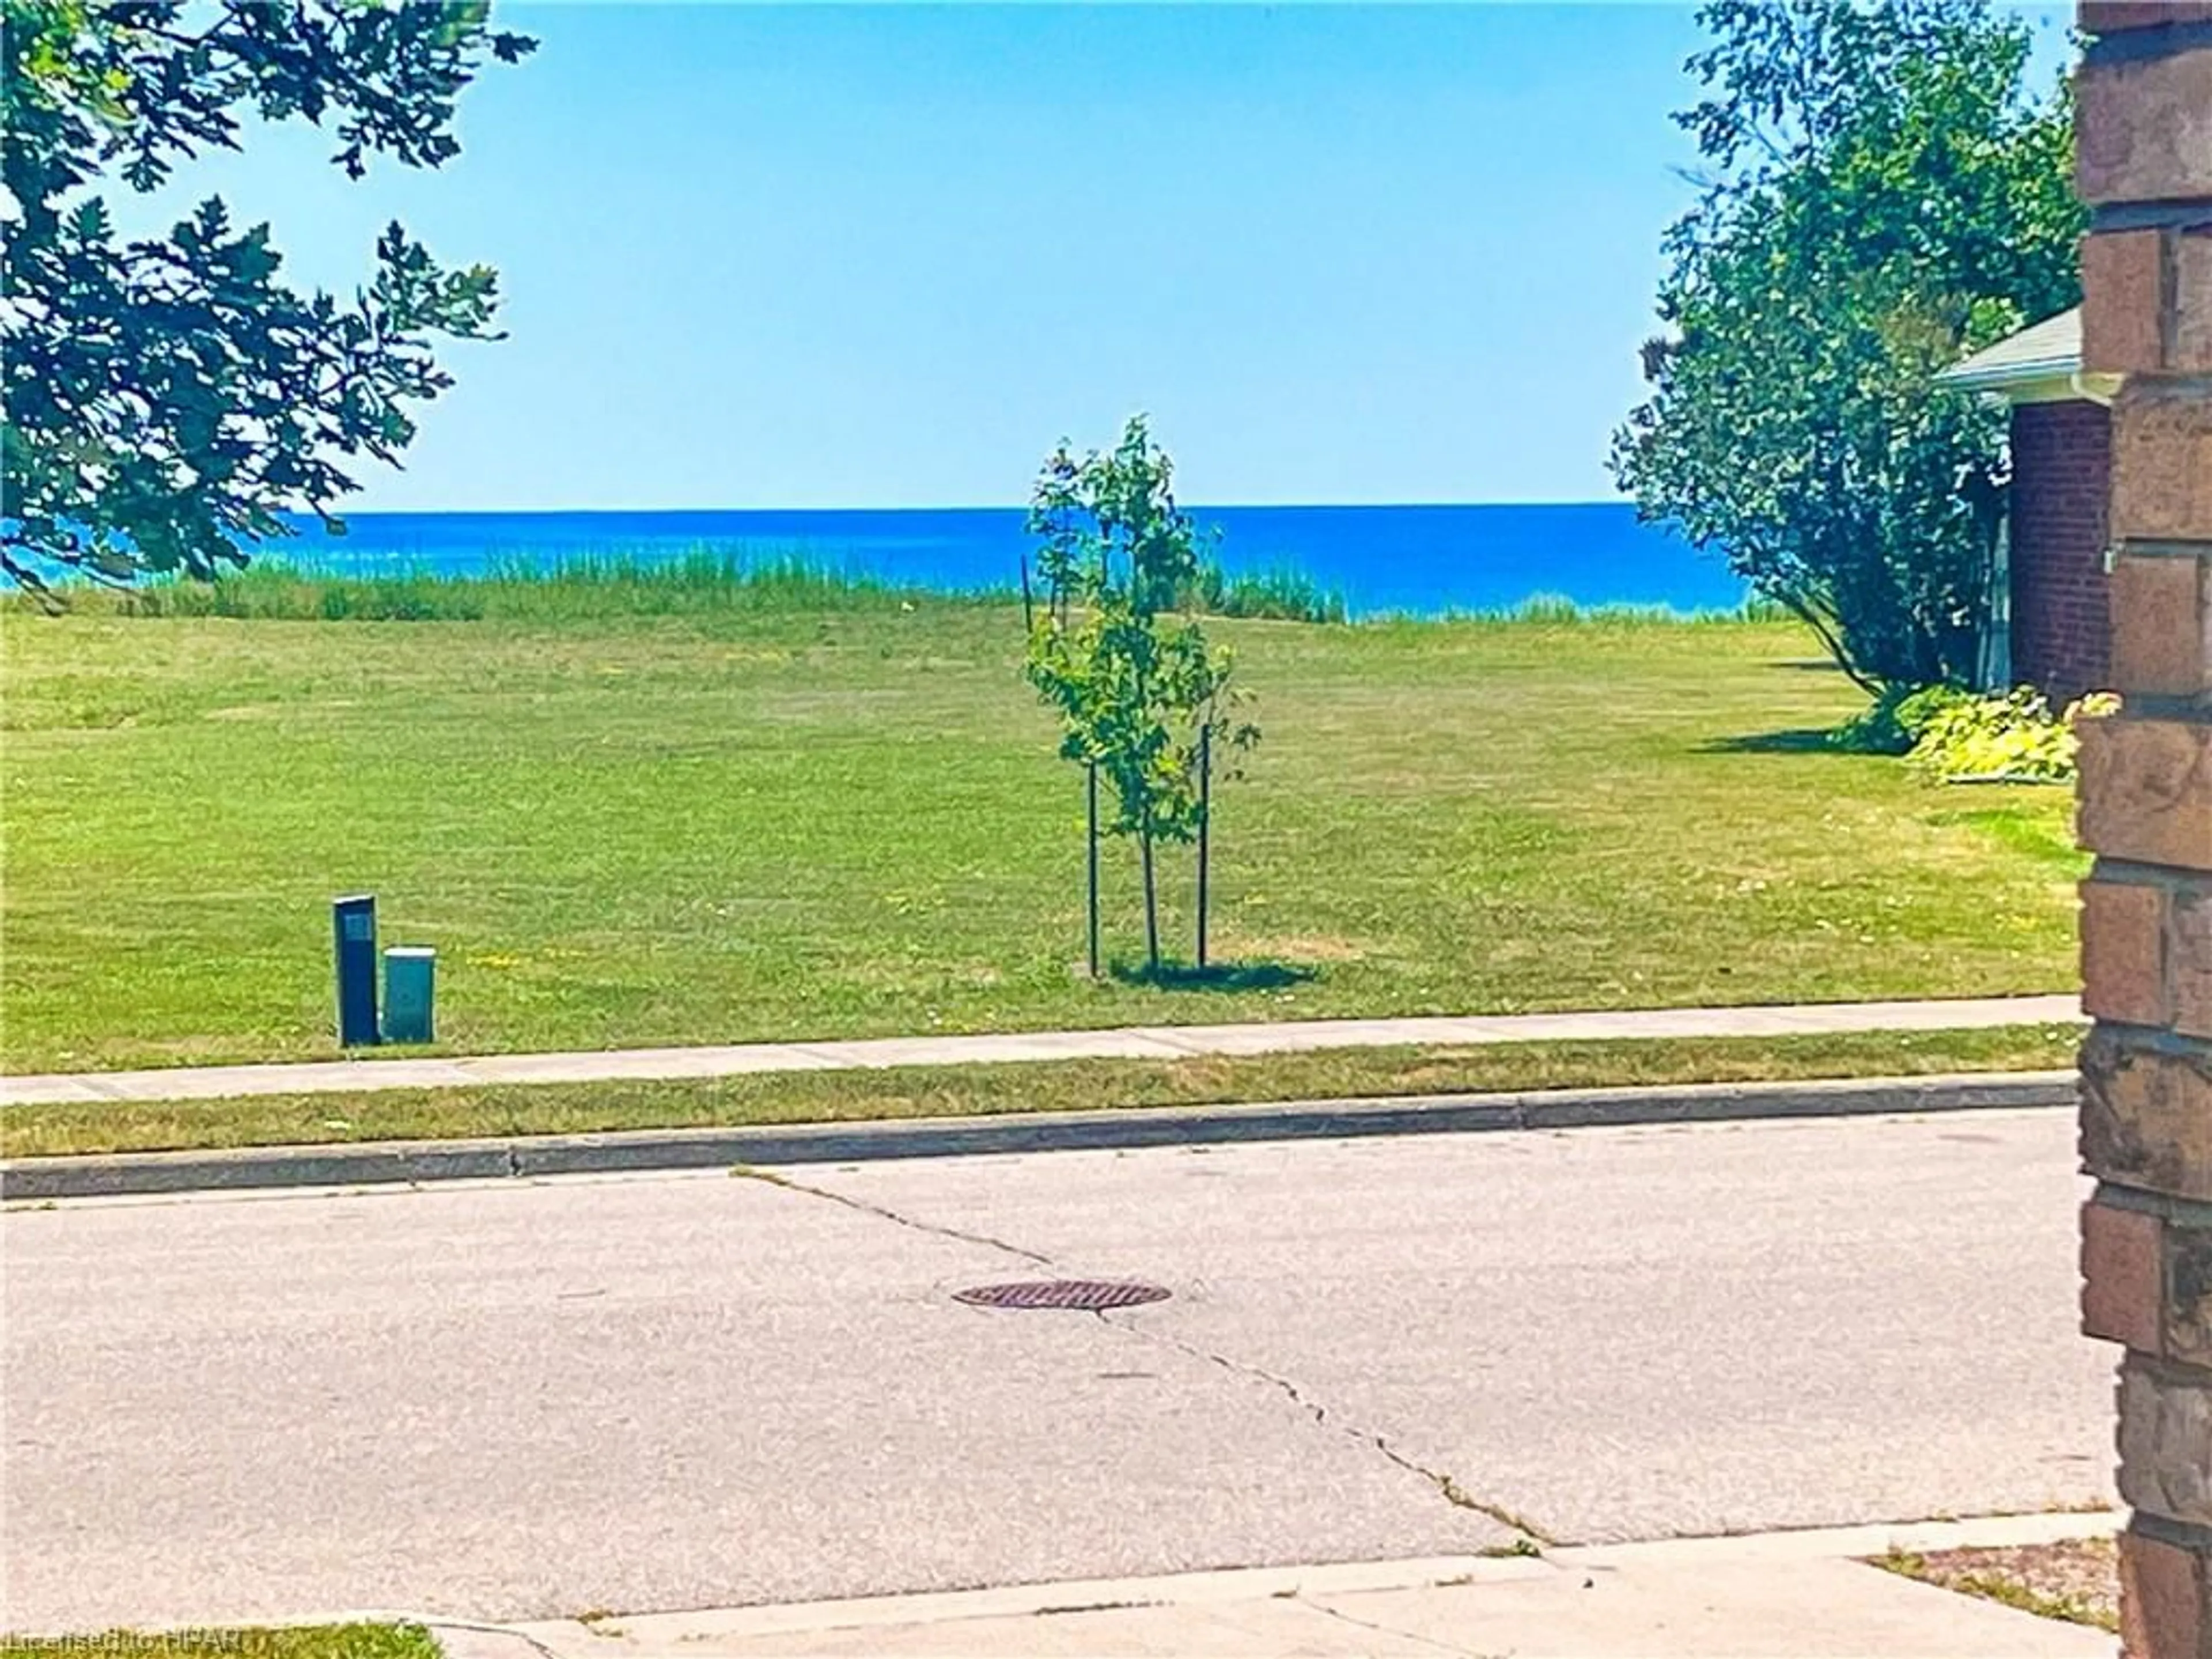 Lakeview for 250 Bethune Cres, Goderich Ontario N7A 4M6